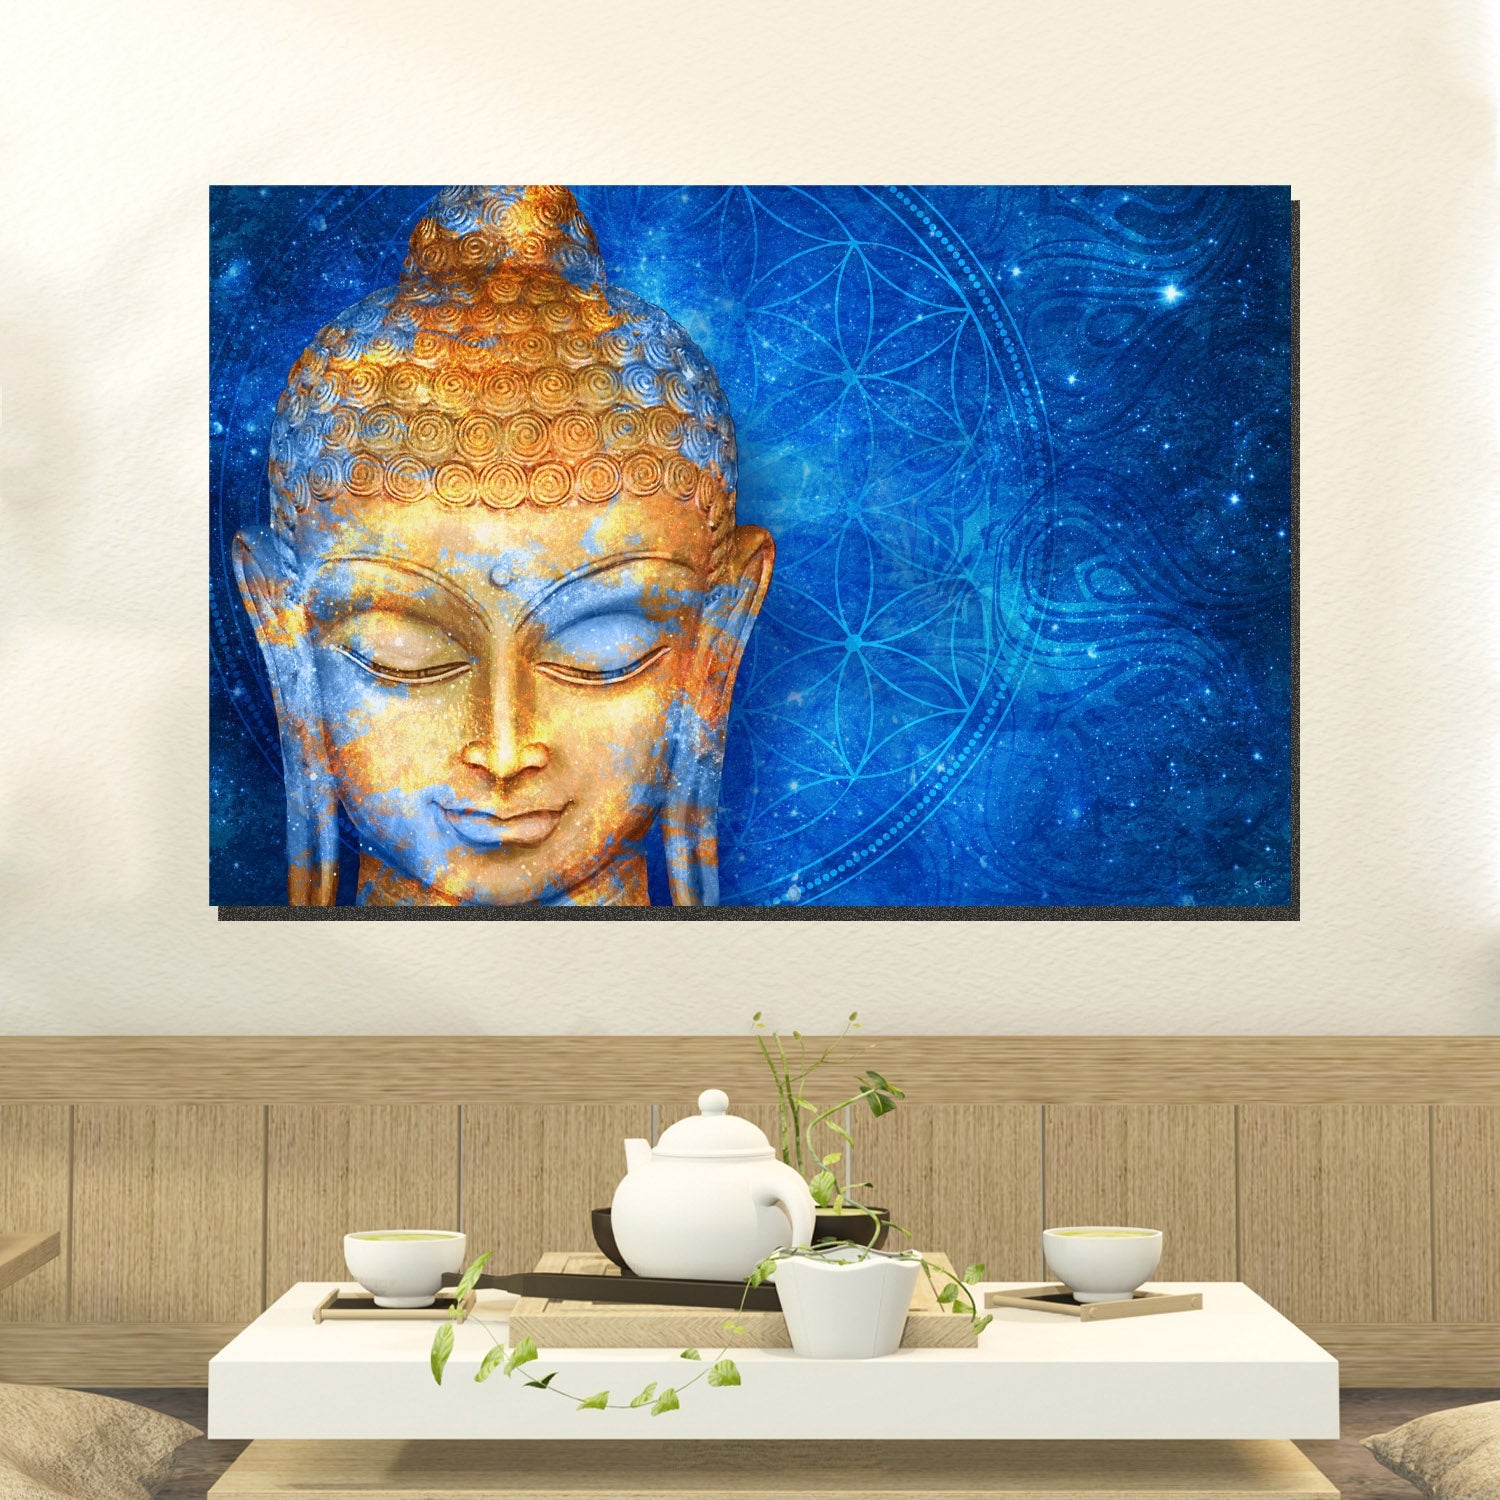 https://cdn.shopify.com/s/files/1/0387/9986/8044/products/BuddhaTurquoiseCanvasPrintStretched-1.jpg